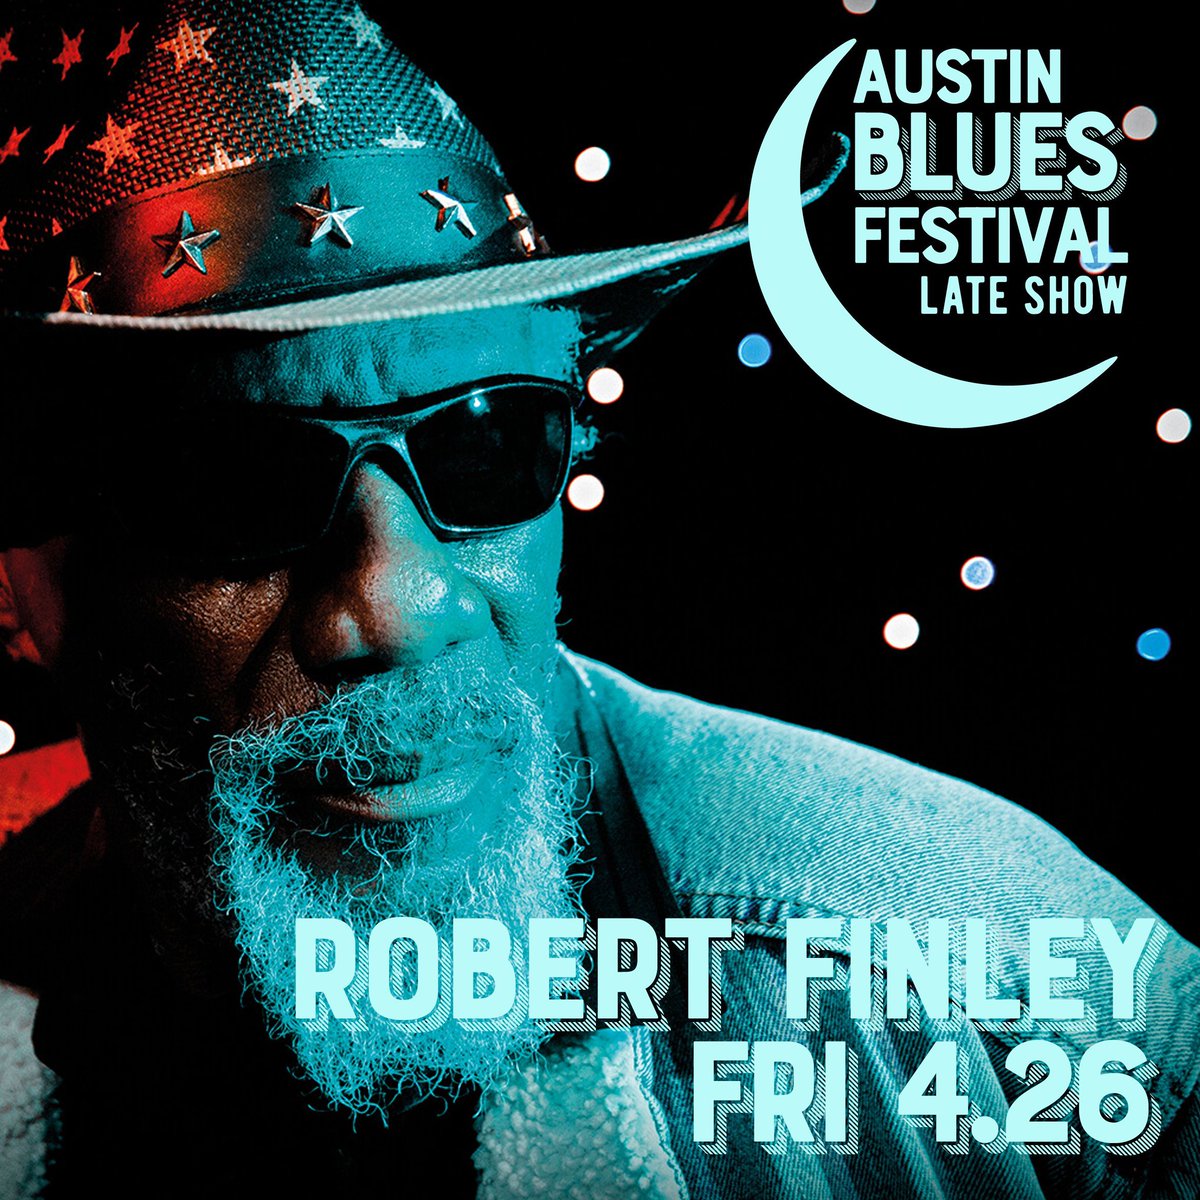 TONIGHT: Robert Finley and Nathan & the Zydeco Cha Chas will be performing at Antone’s! DJ Raquiqui will be spinning throughout the night. Doors at 8pm, downbeat at 9pm. Tickets will be available at the door and online ➡️ buff.ly/3wfLSM8